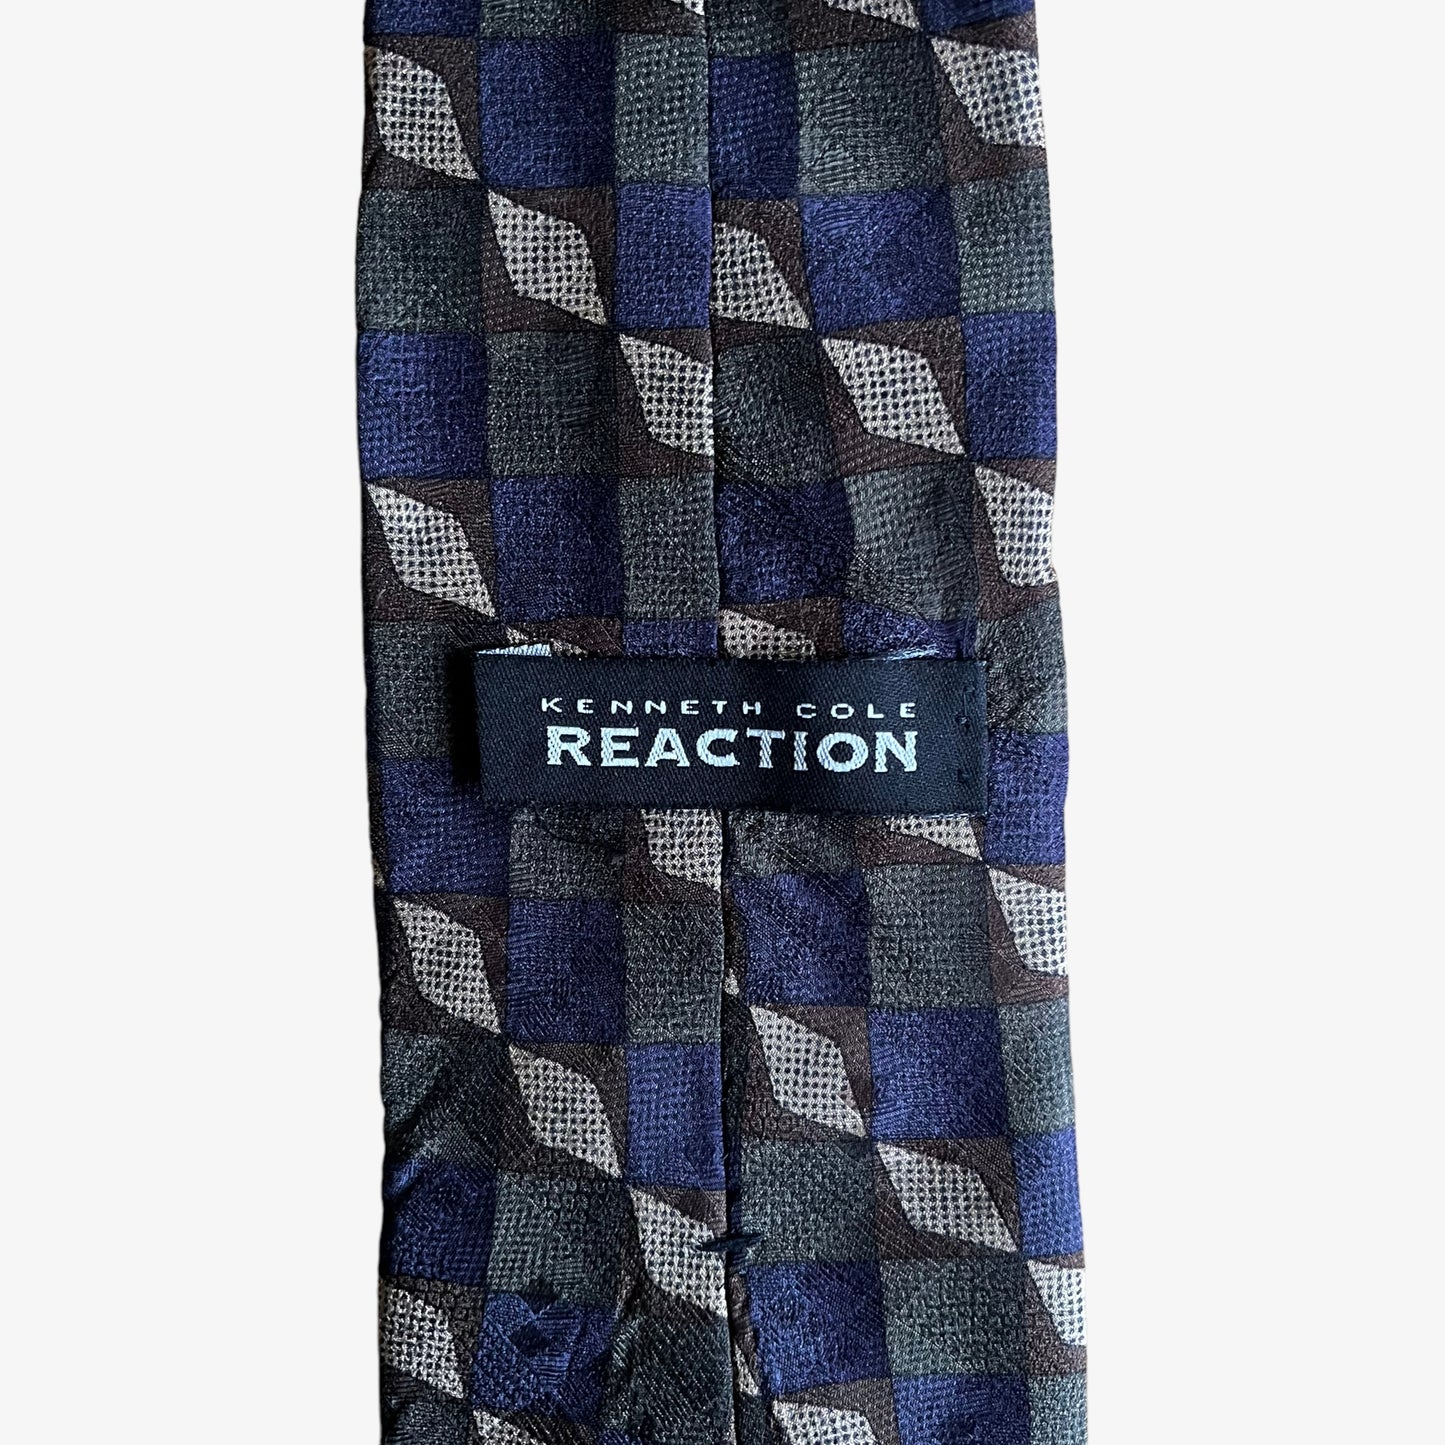 Vintage 90s Kenneth Cole Reaction Abstract Print Silk Tie Label - Casspios Dream